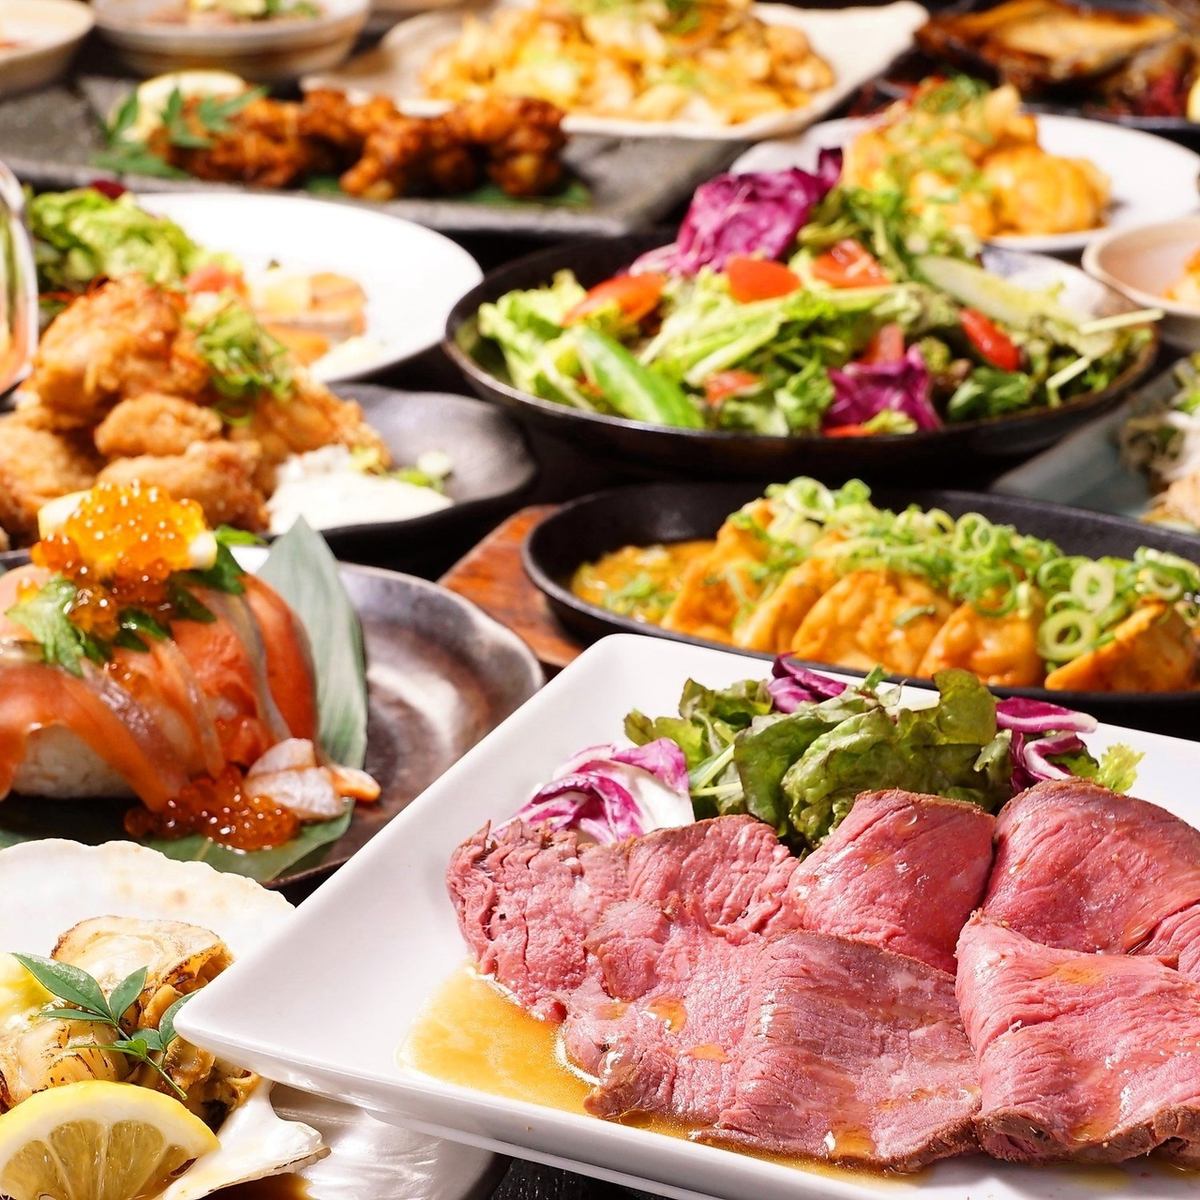 For various banquets☆3 hours☆All-you-can-eat and drink from 4,500 yen (tax included)~♪